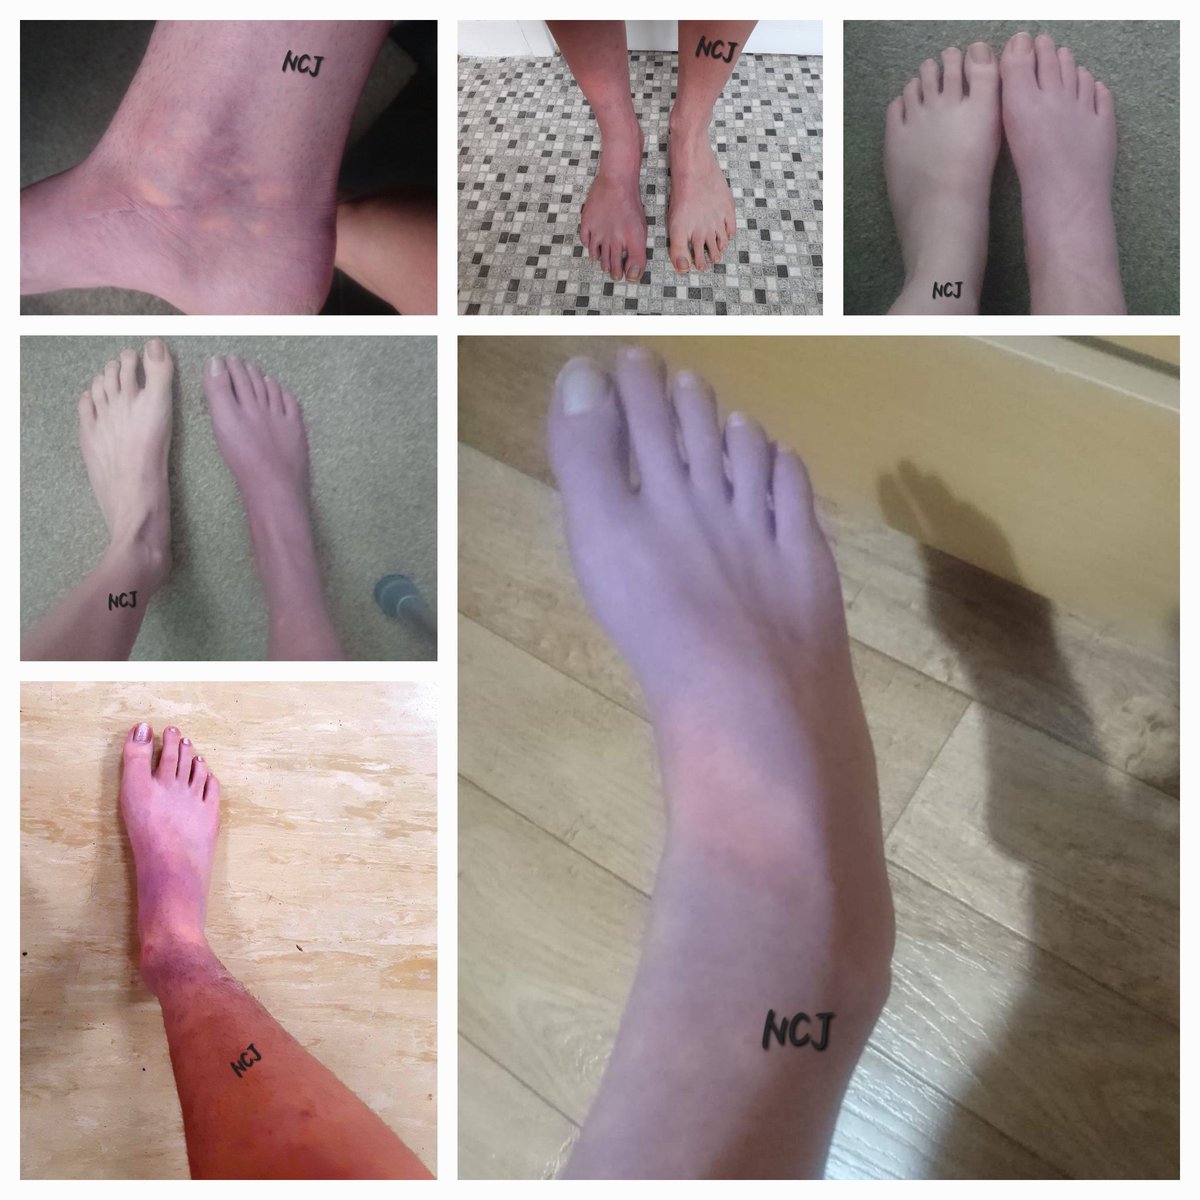 Watched take care of Maya on @NetflixUK?

CRPS was a side product of my surgeries.Below is a selection of photos.Every day is a painful battle that so many have to endure.The first I ever heard of #CRPS was when I was diagnosed with it.Let's spread awareness through @BNightsCRPS